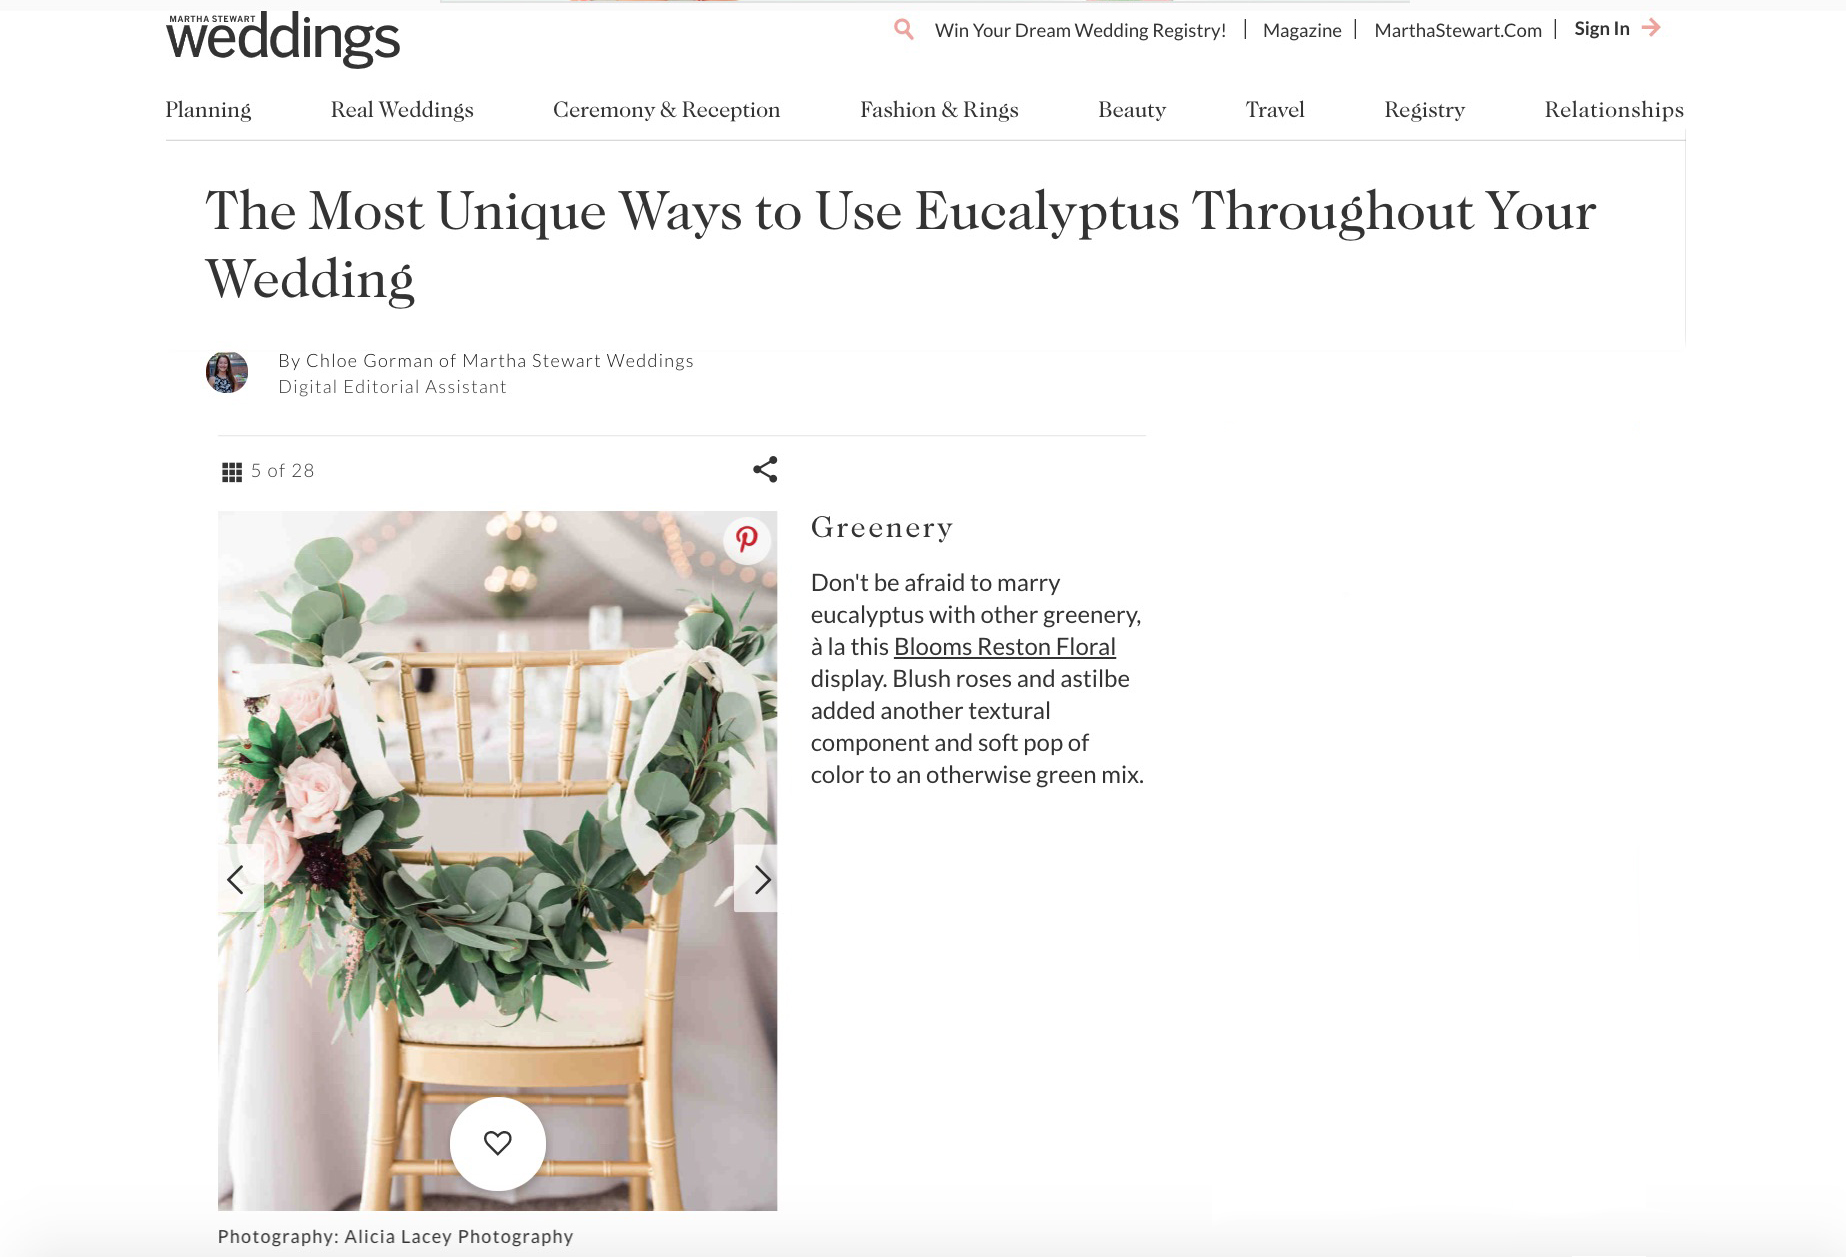 Martha Stewart Weddings featured 25 ways to use eucalyptus at your wedding, including one by Alicia Lacey at Rust Manor House in Leesburg, VA.